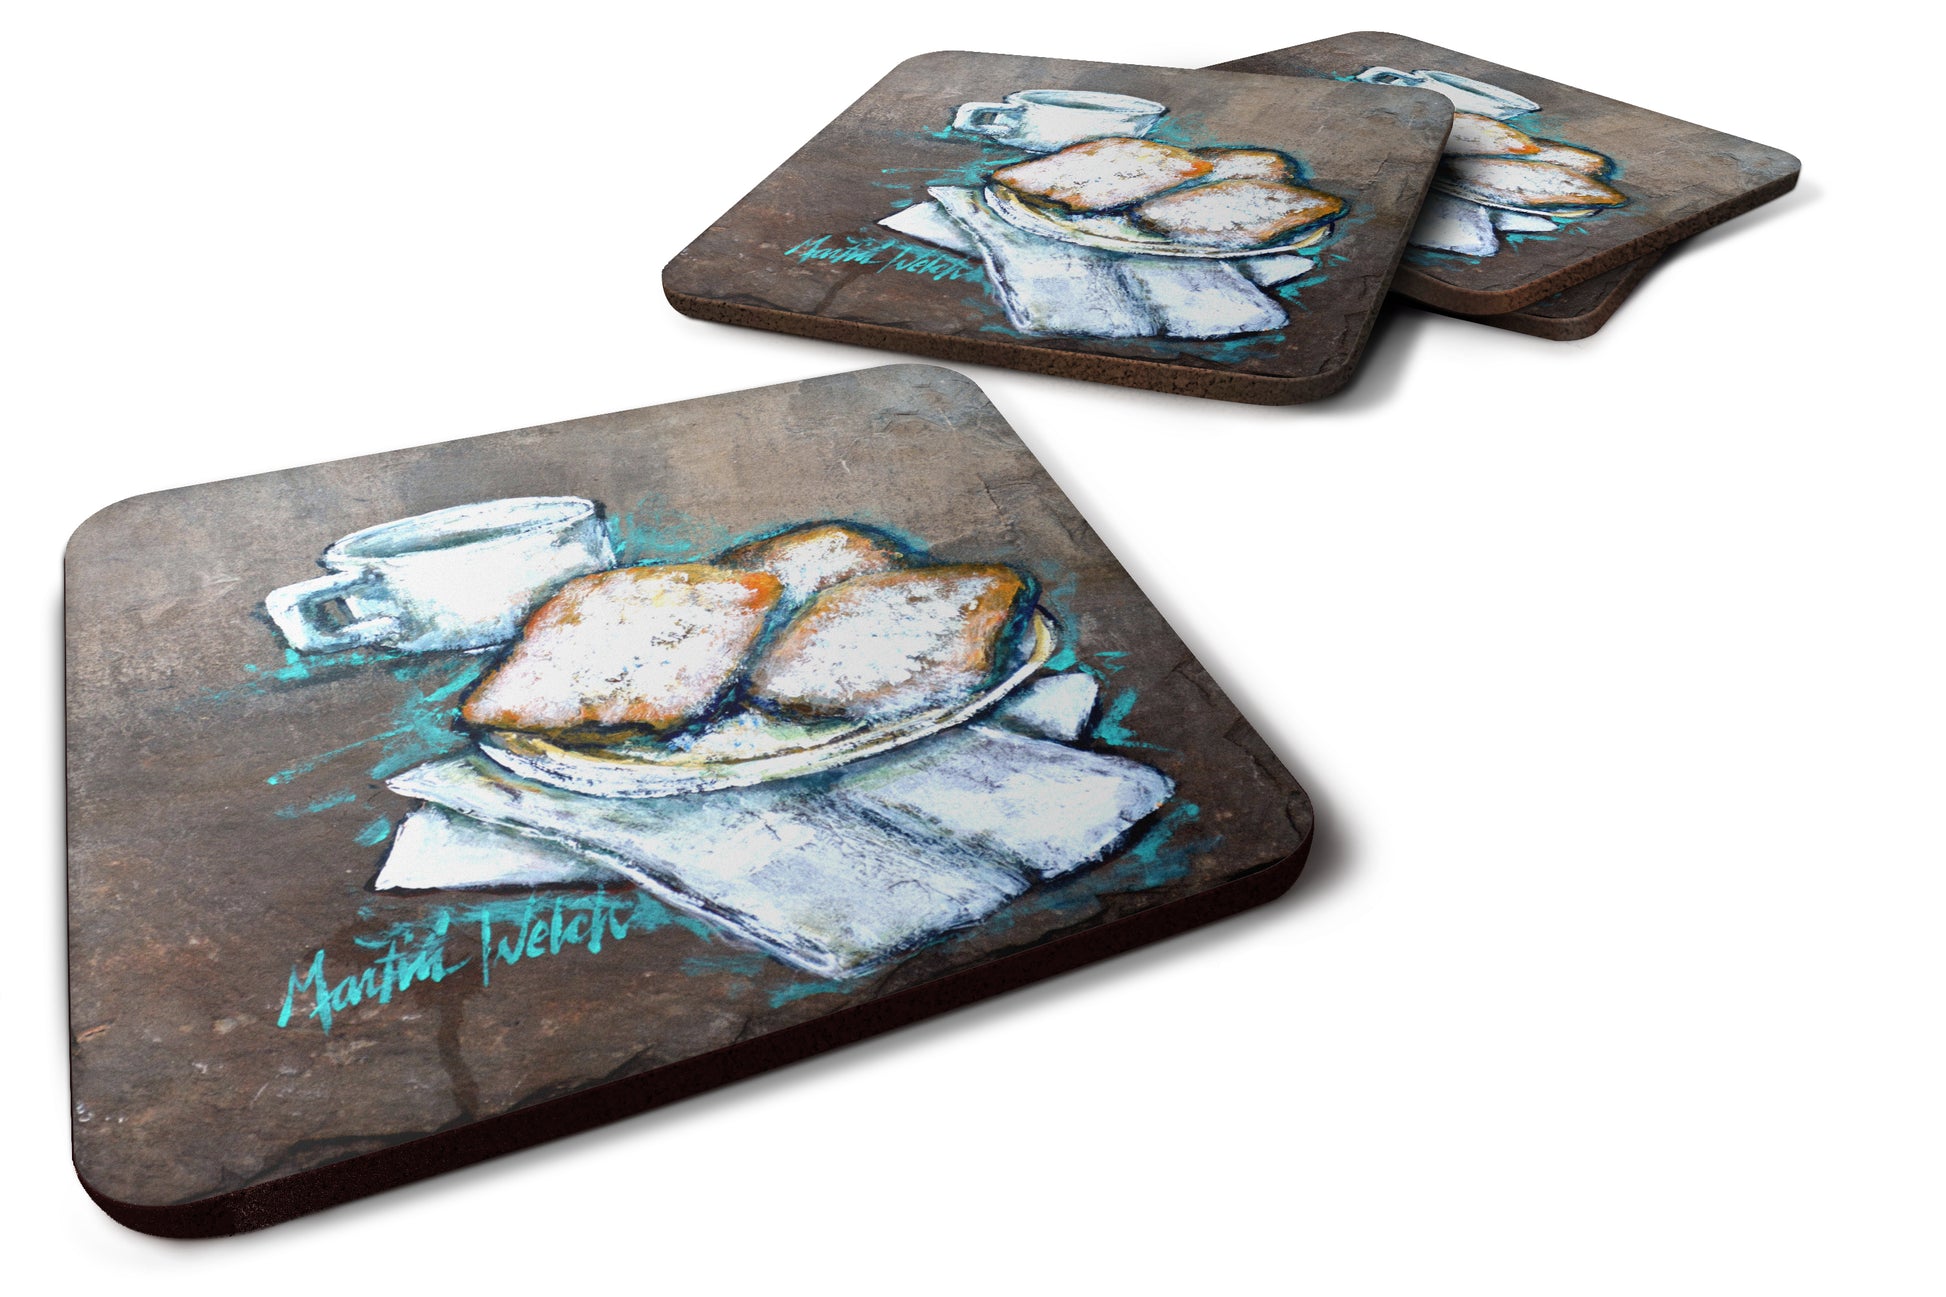 Buy this Beignets Piping Hot Foam Coaster Set of 4